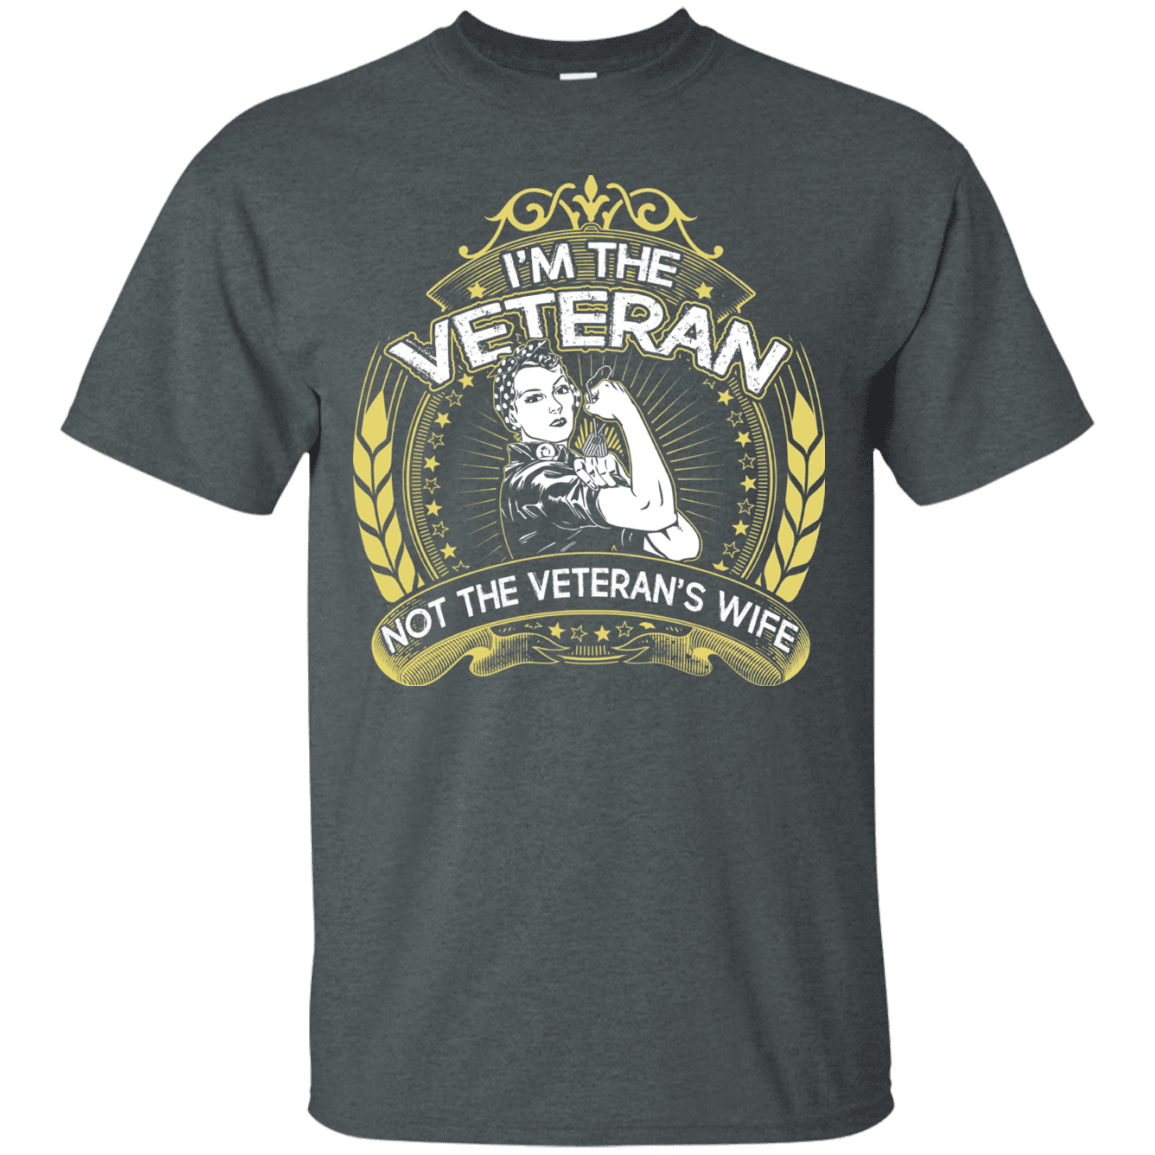 Military T-Shirt "I AM THE VETERAN AND NOT THE VETERAN'S WIFE"-TShirt-General-Veterans Nation